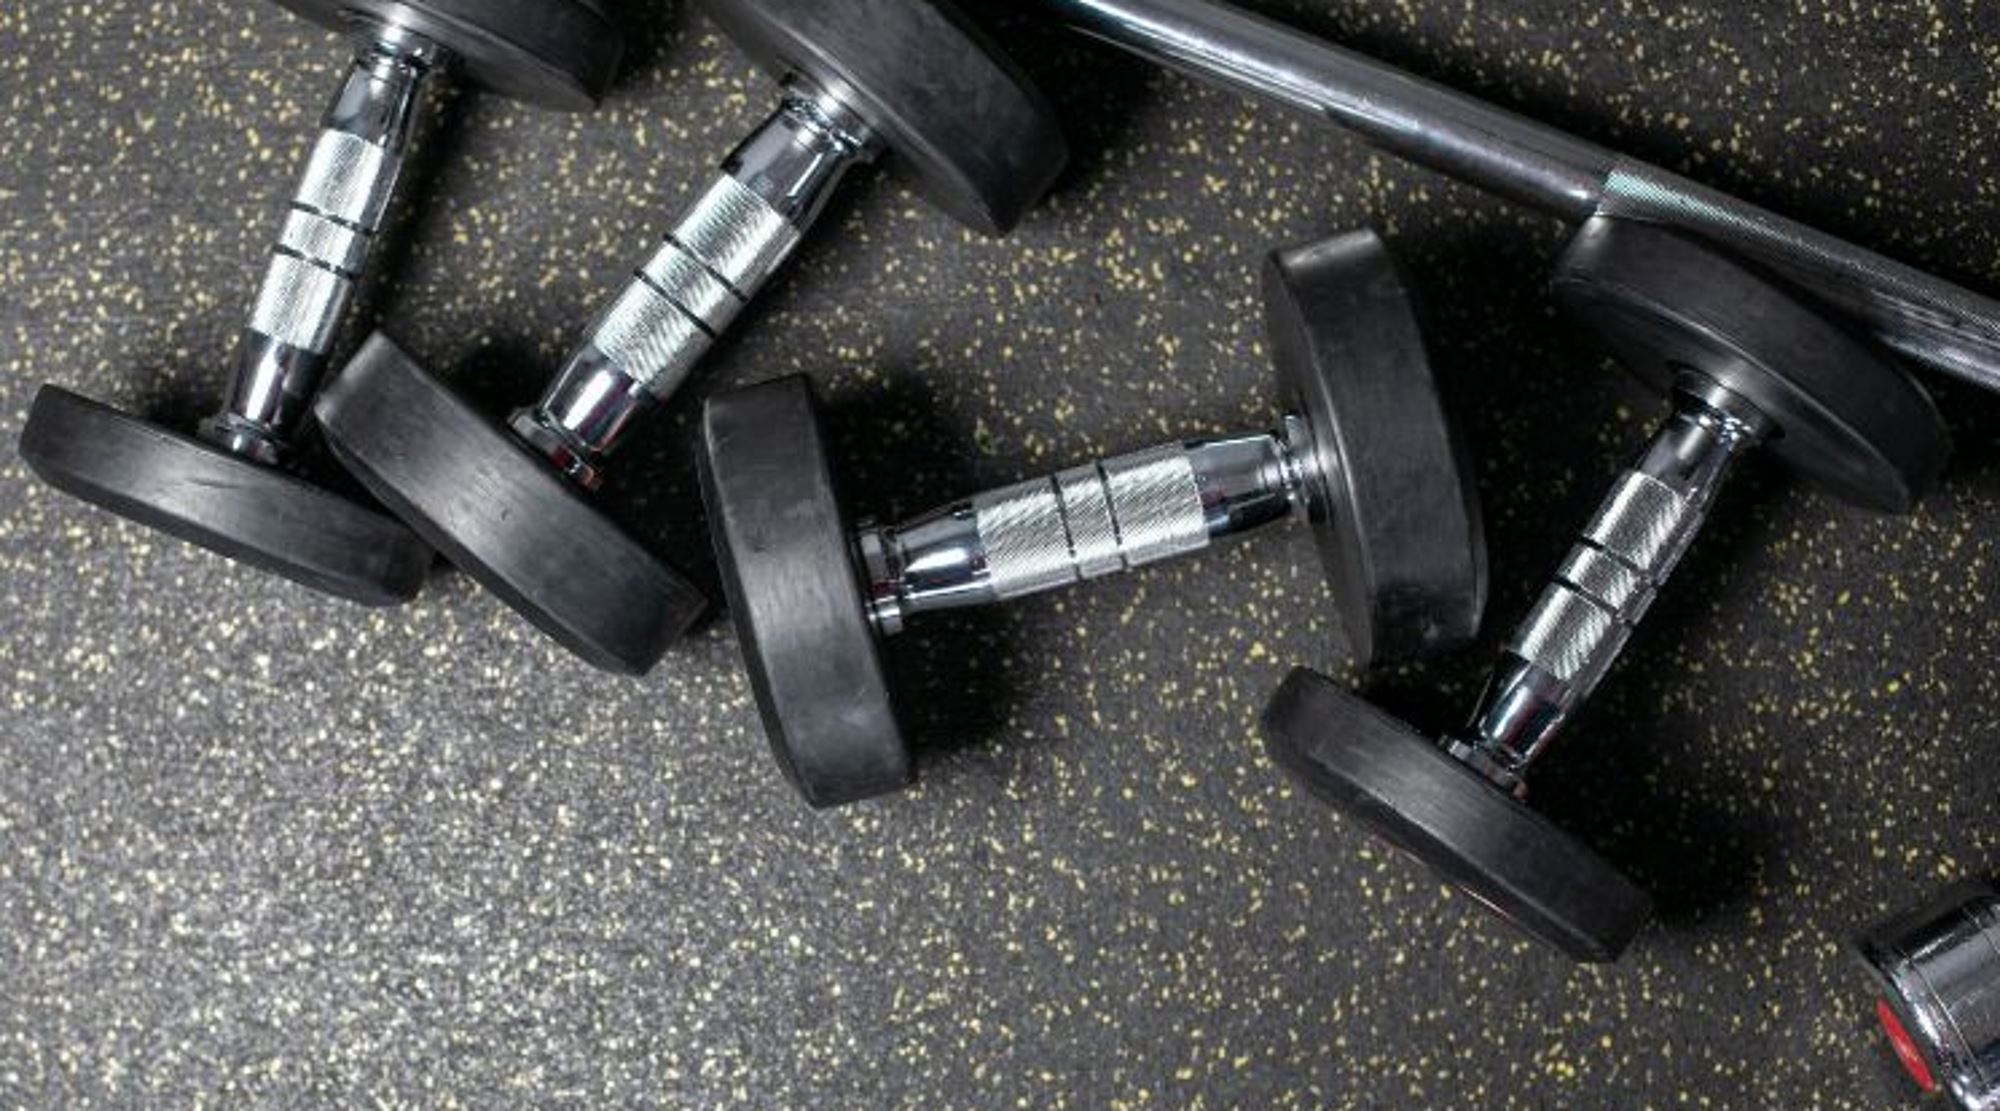 Dumbbell weights on basement gym floor.